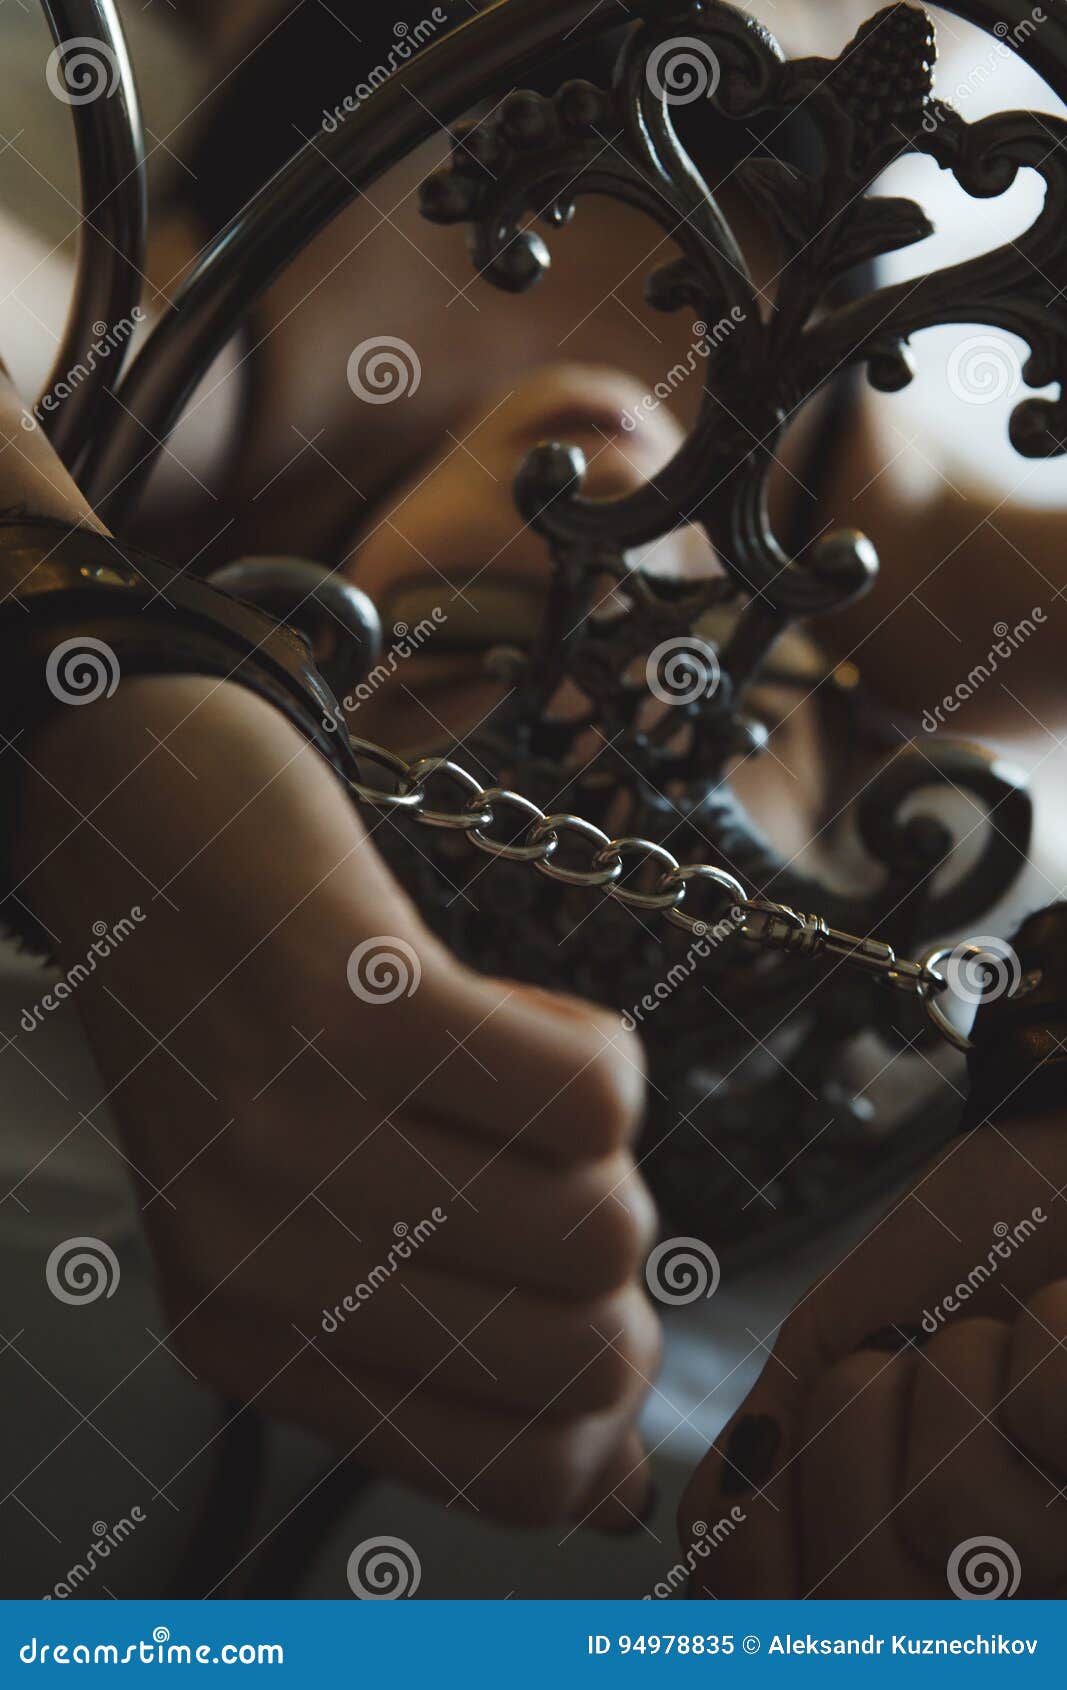 Women Chained To Bed